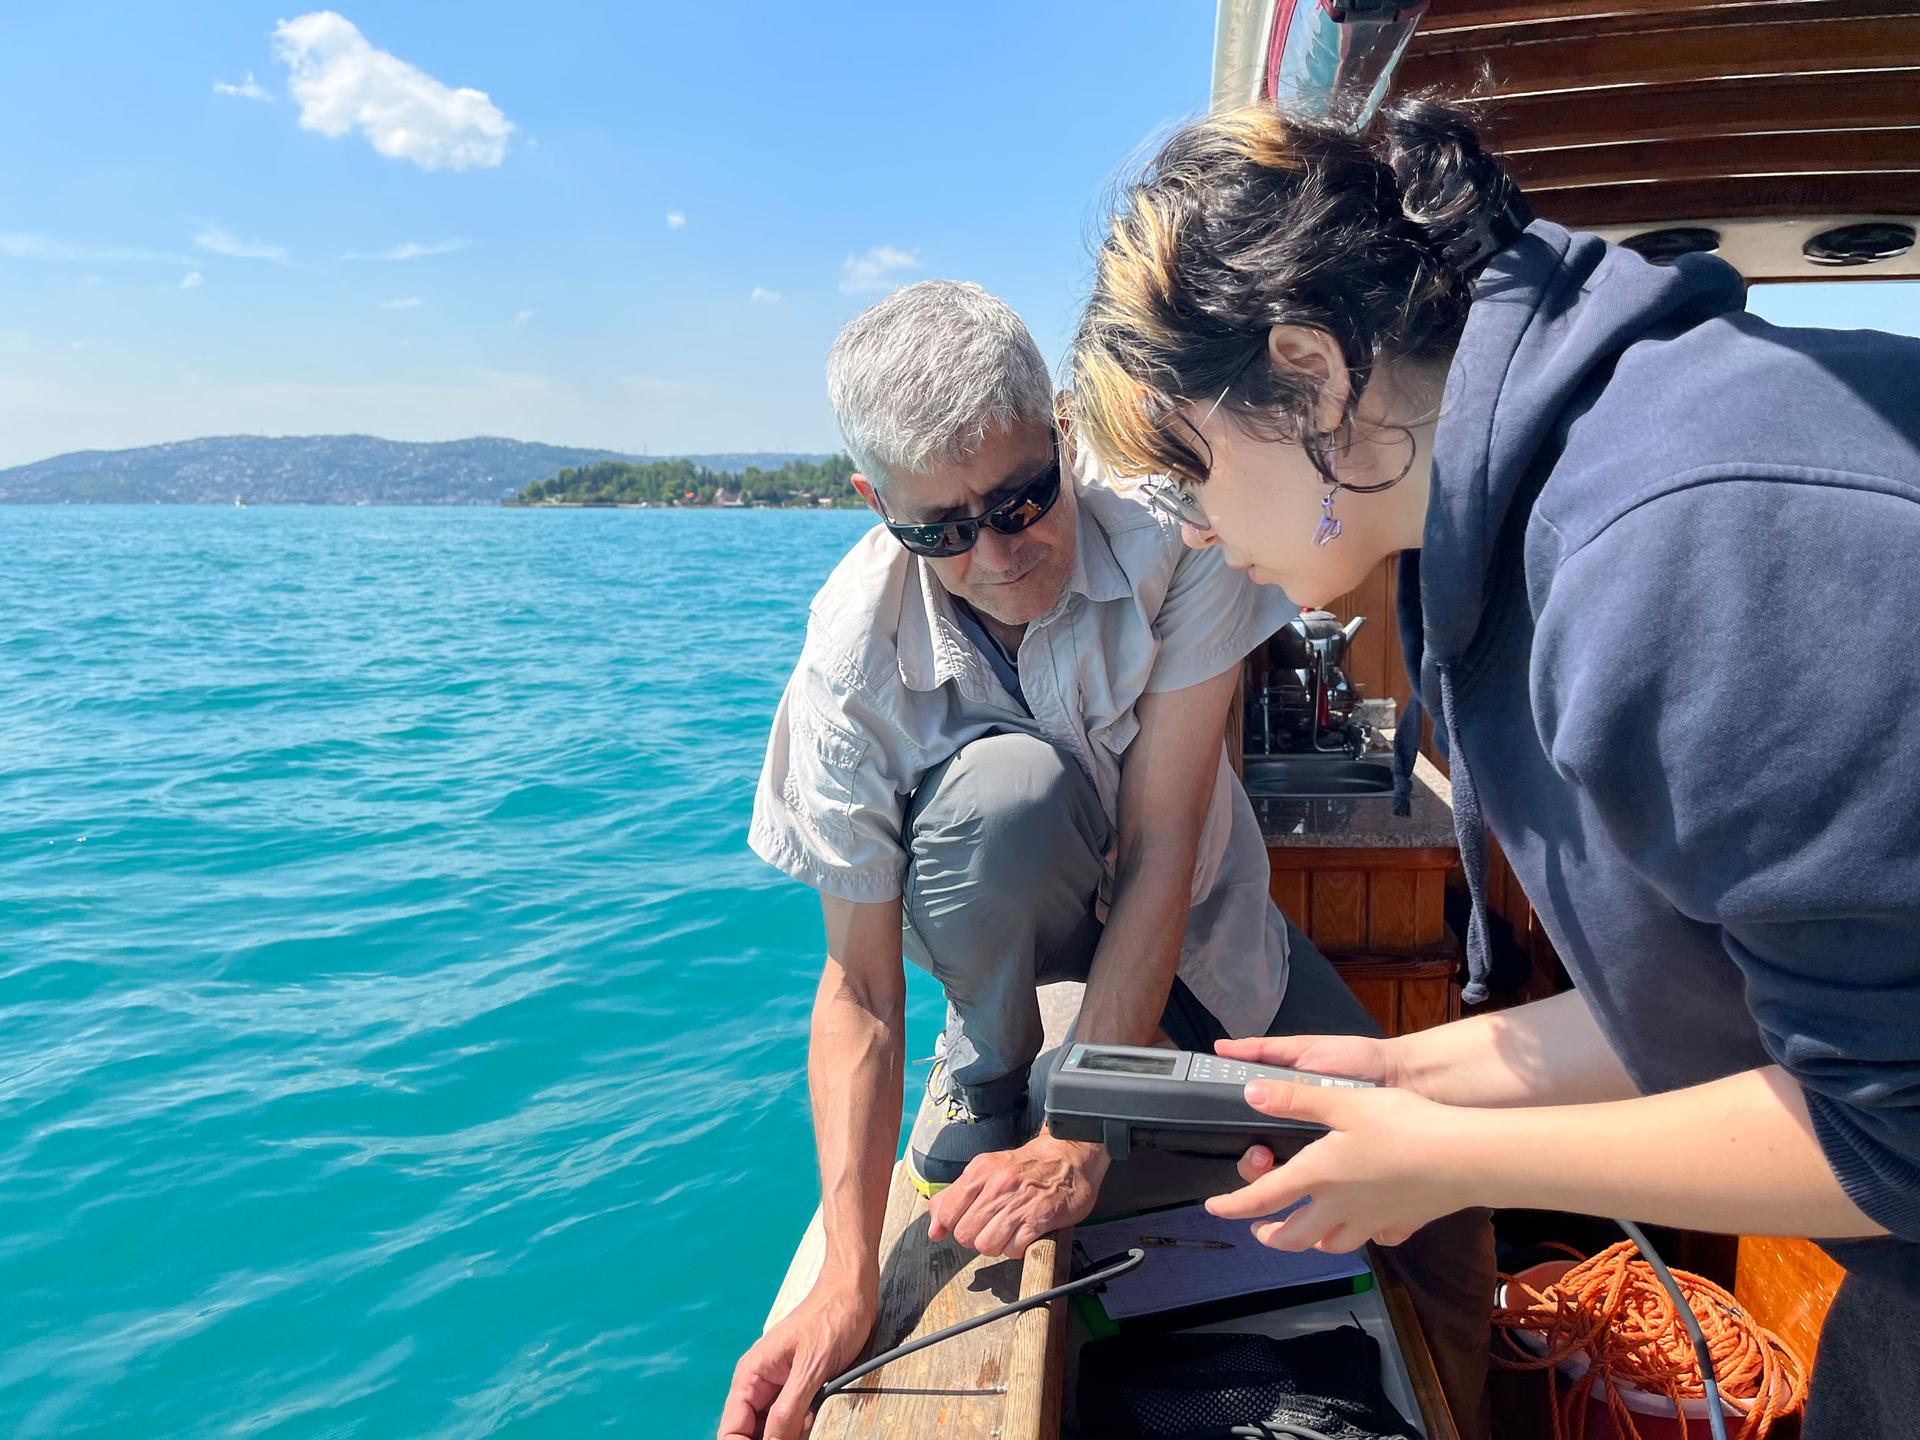 To hear the dolphins’ vocalizations, the researchers have installed hydrophones in the Bosphorus.